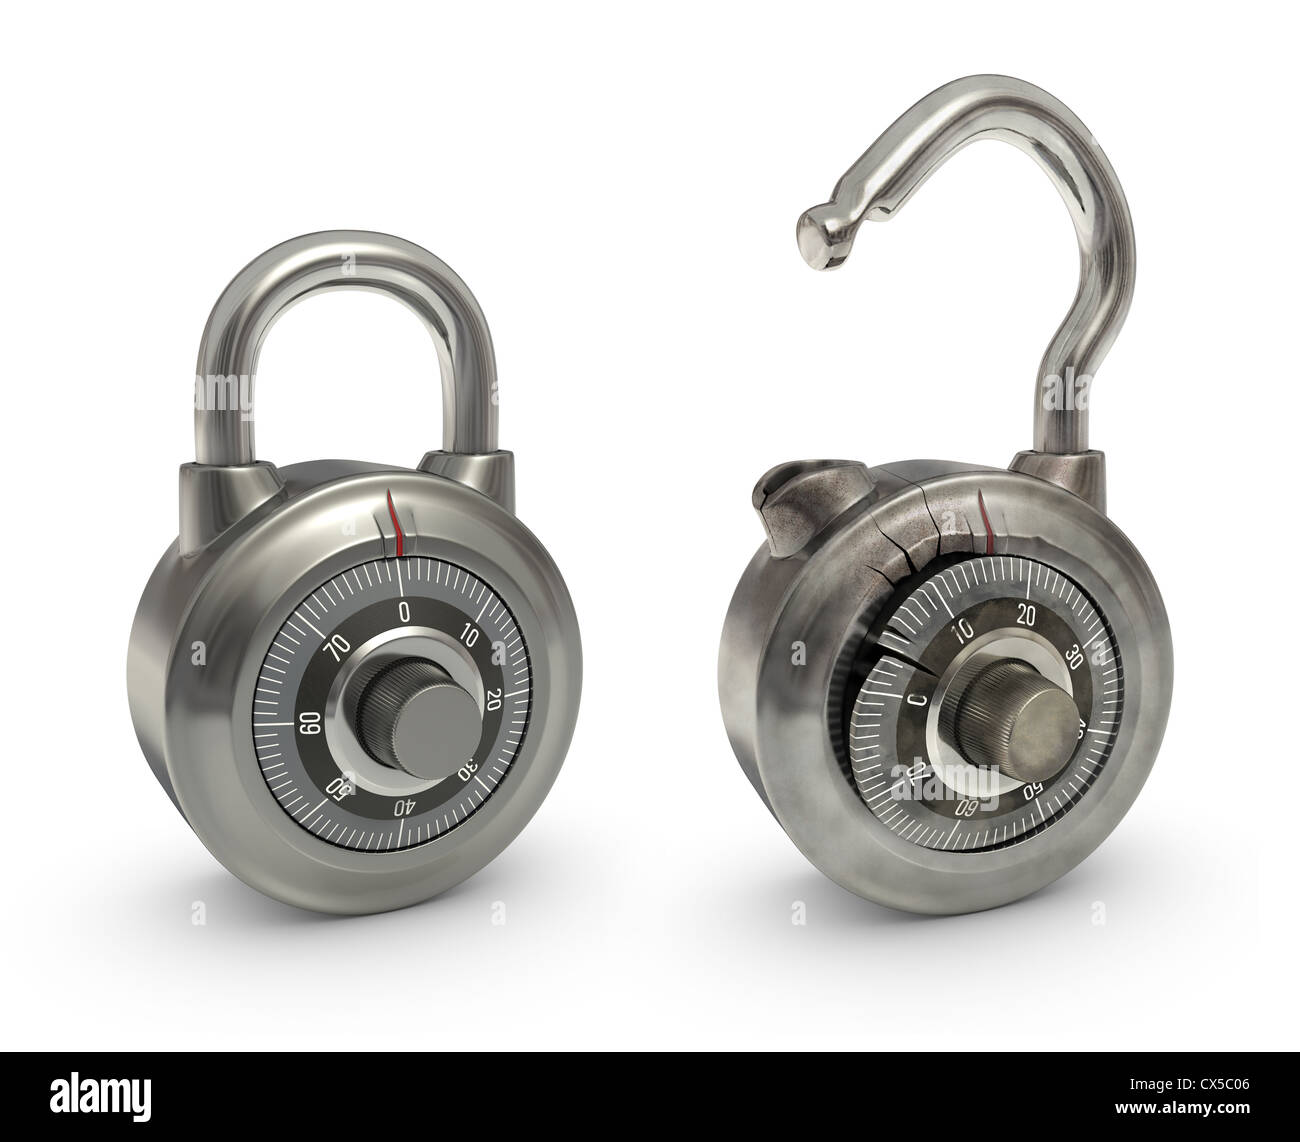 Two padlocks, one new and other broken. Both in the same position. Useful for animation overlaying the images. Stock Photo